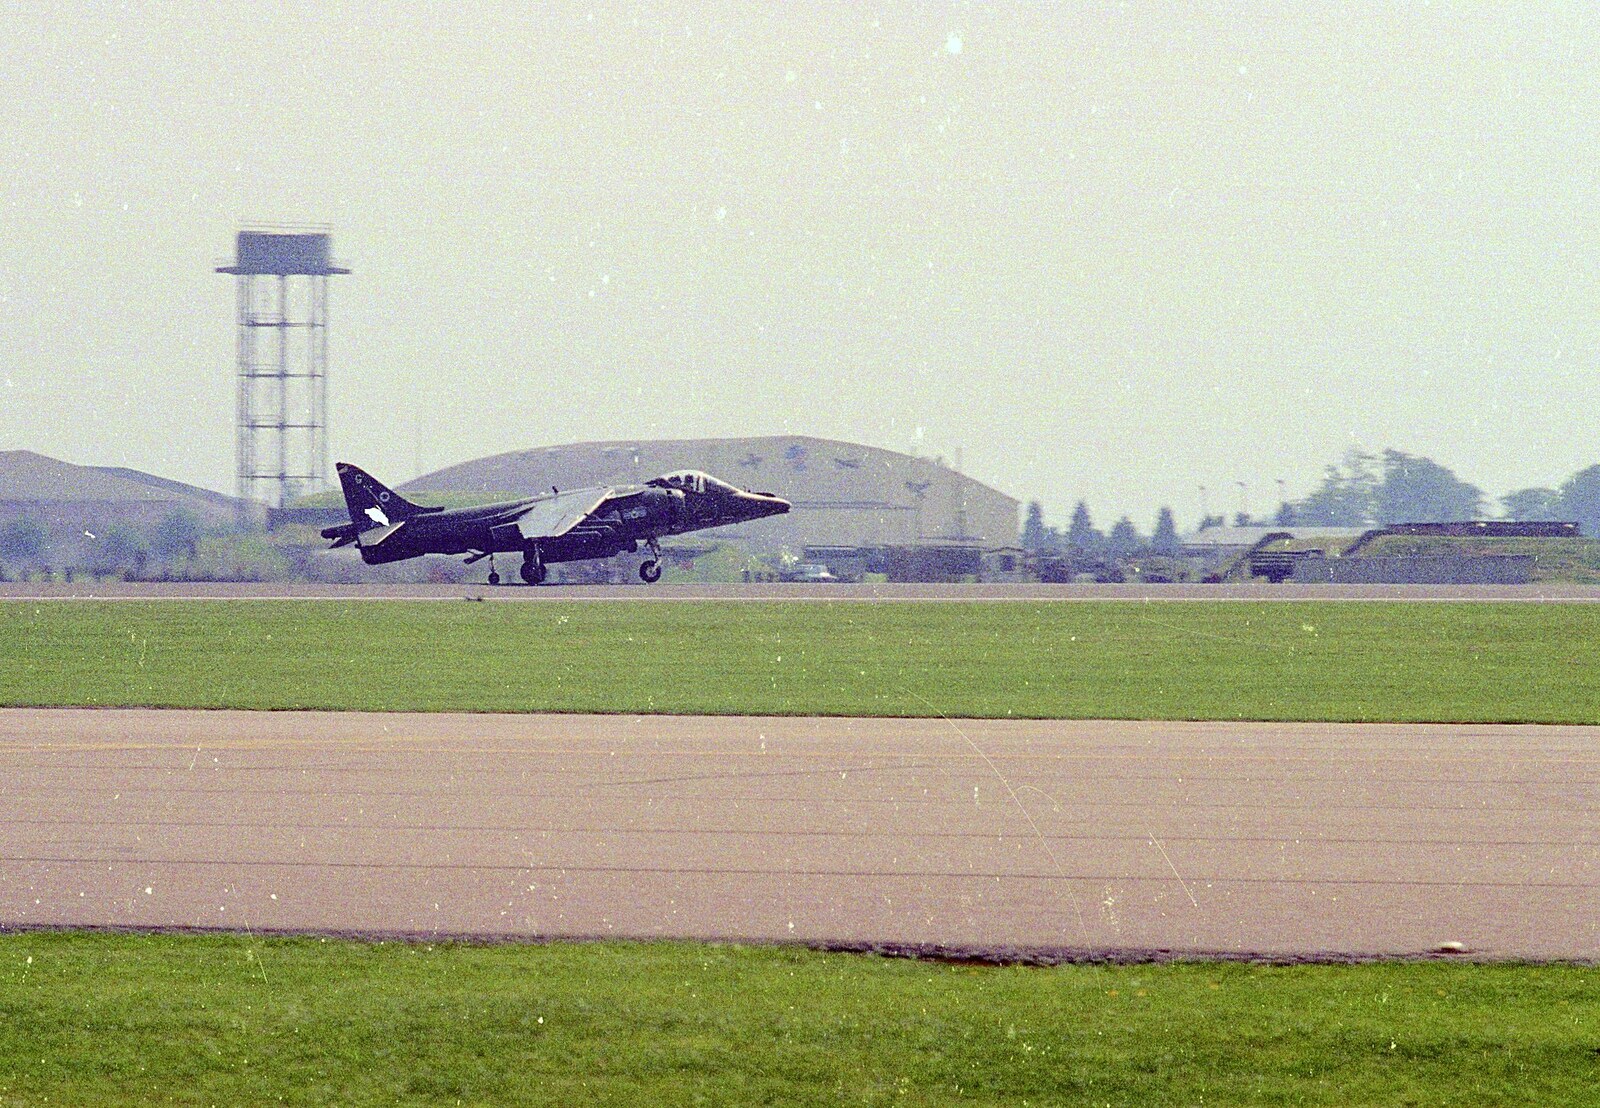 The Harrier touches down from The Mildenhall Air Fete, Mildenhall, Suffolk - 29th May 1994